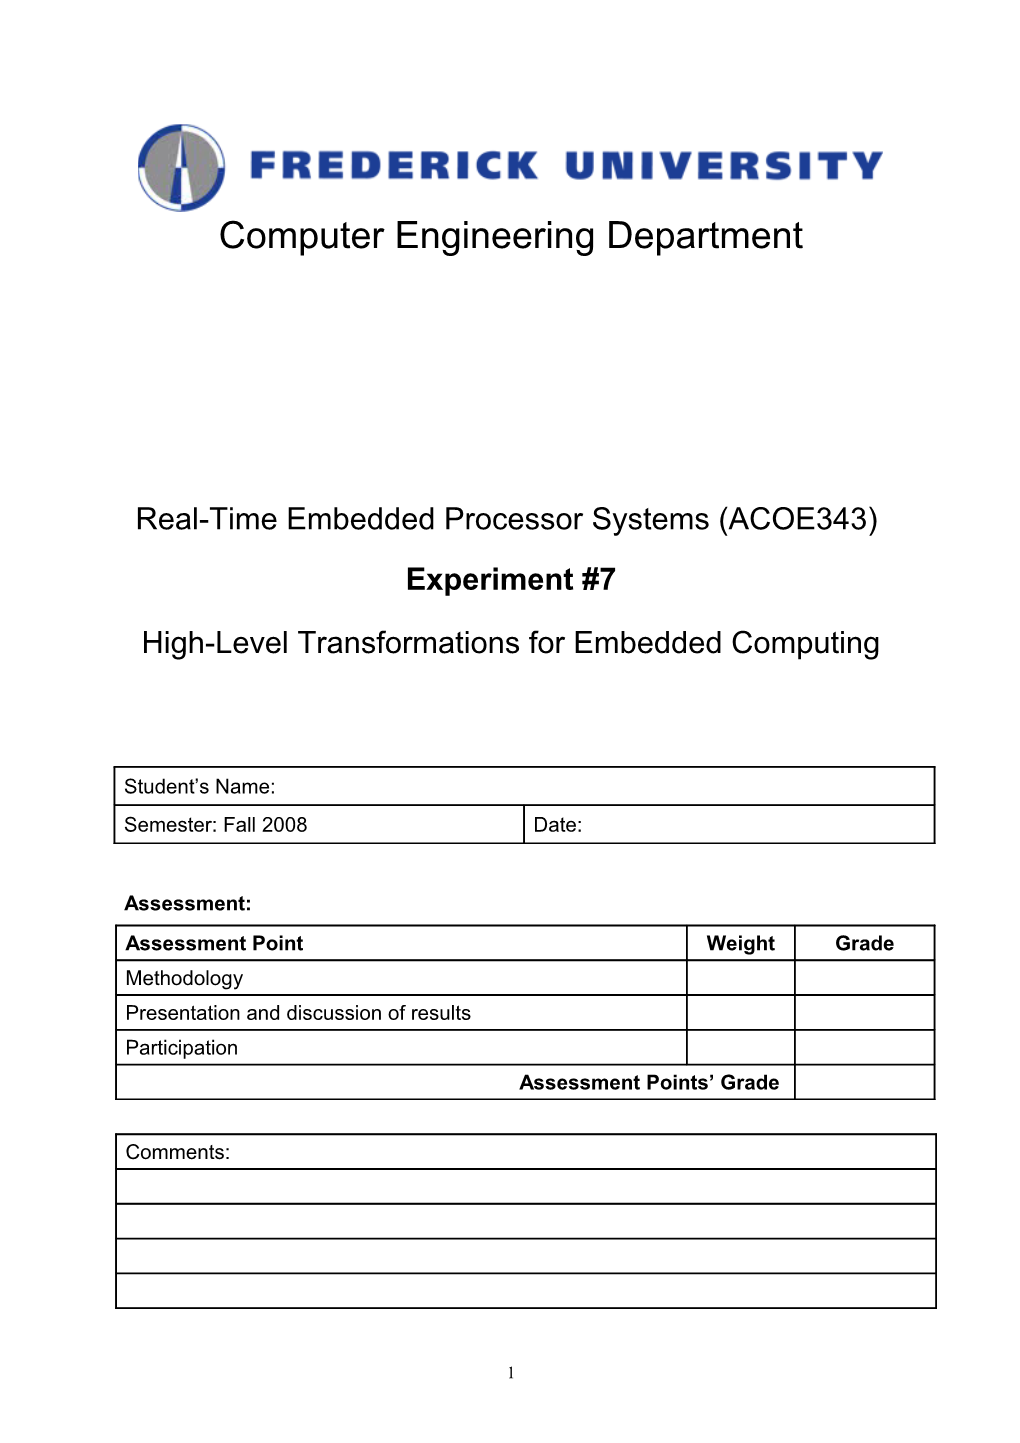 Real-Time Embedded Processor Systems ACOE343 Experiment #7